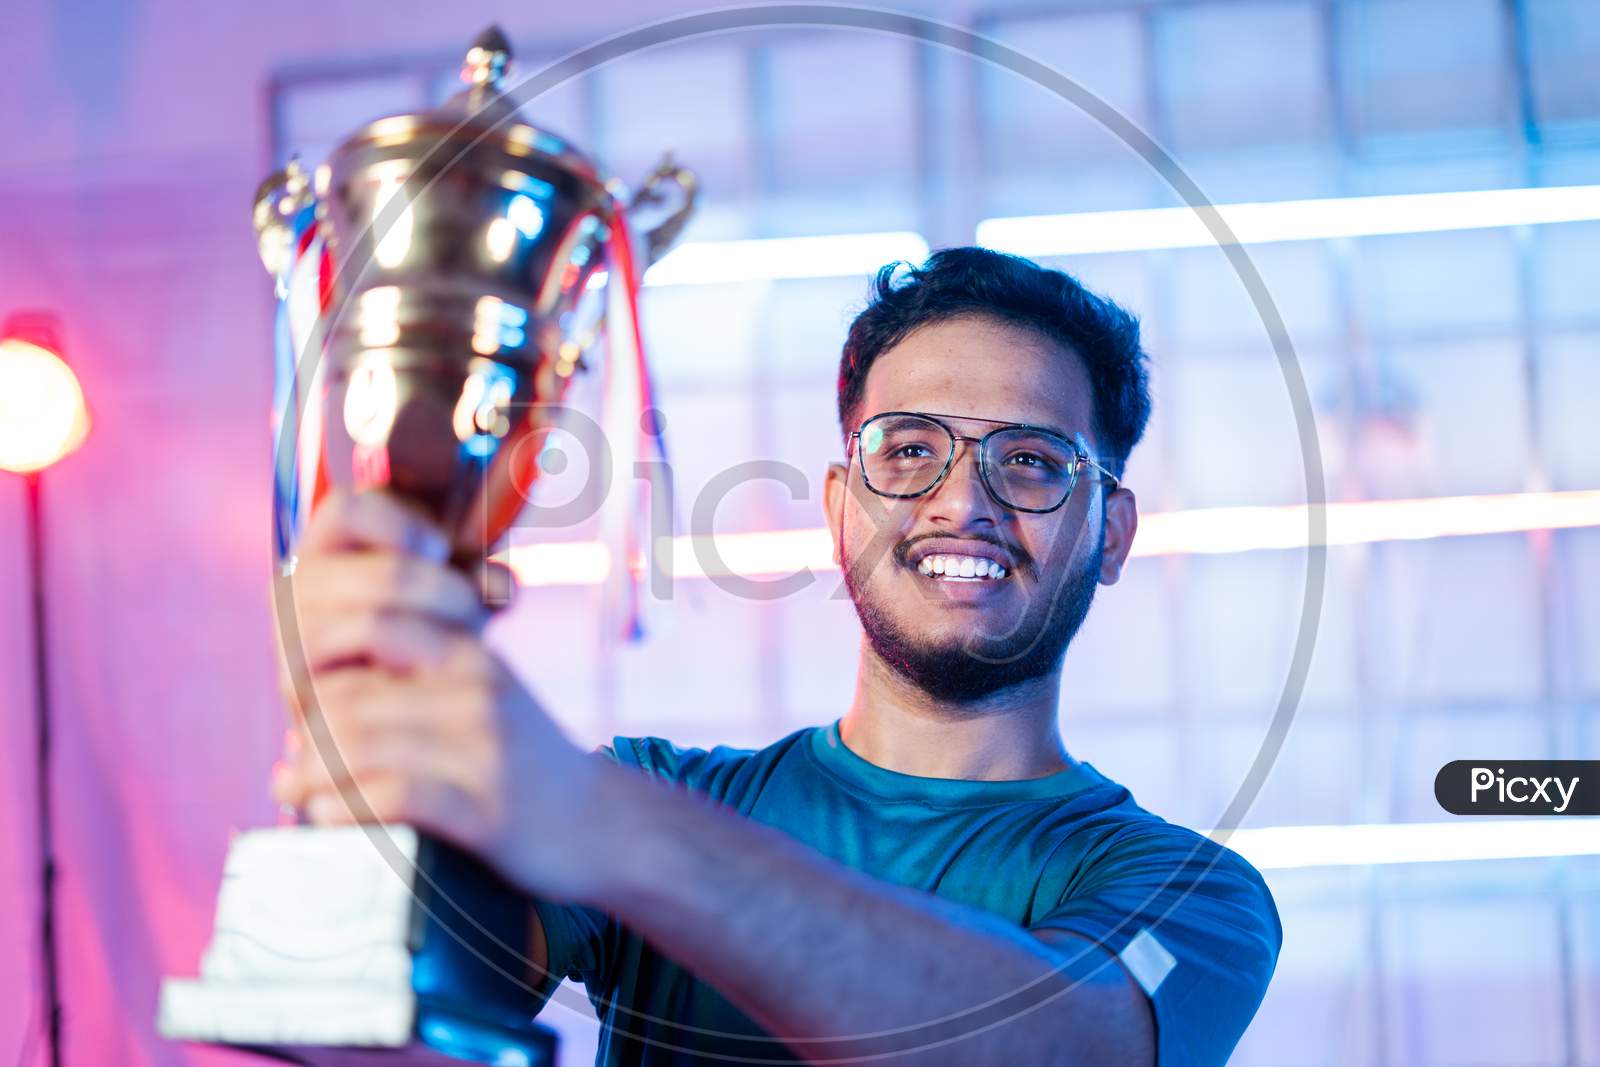 Cheerful Happy Smiling Gamer With Headphones Celebrating Byholding Winning Trophy At Esports Gaming Tournament Stage